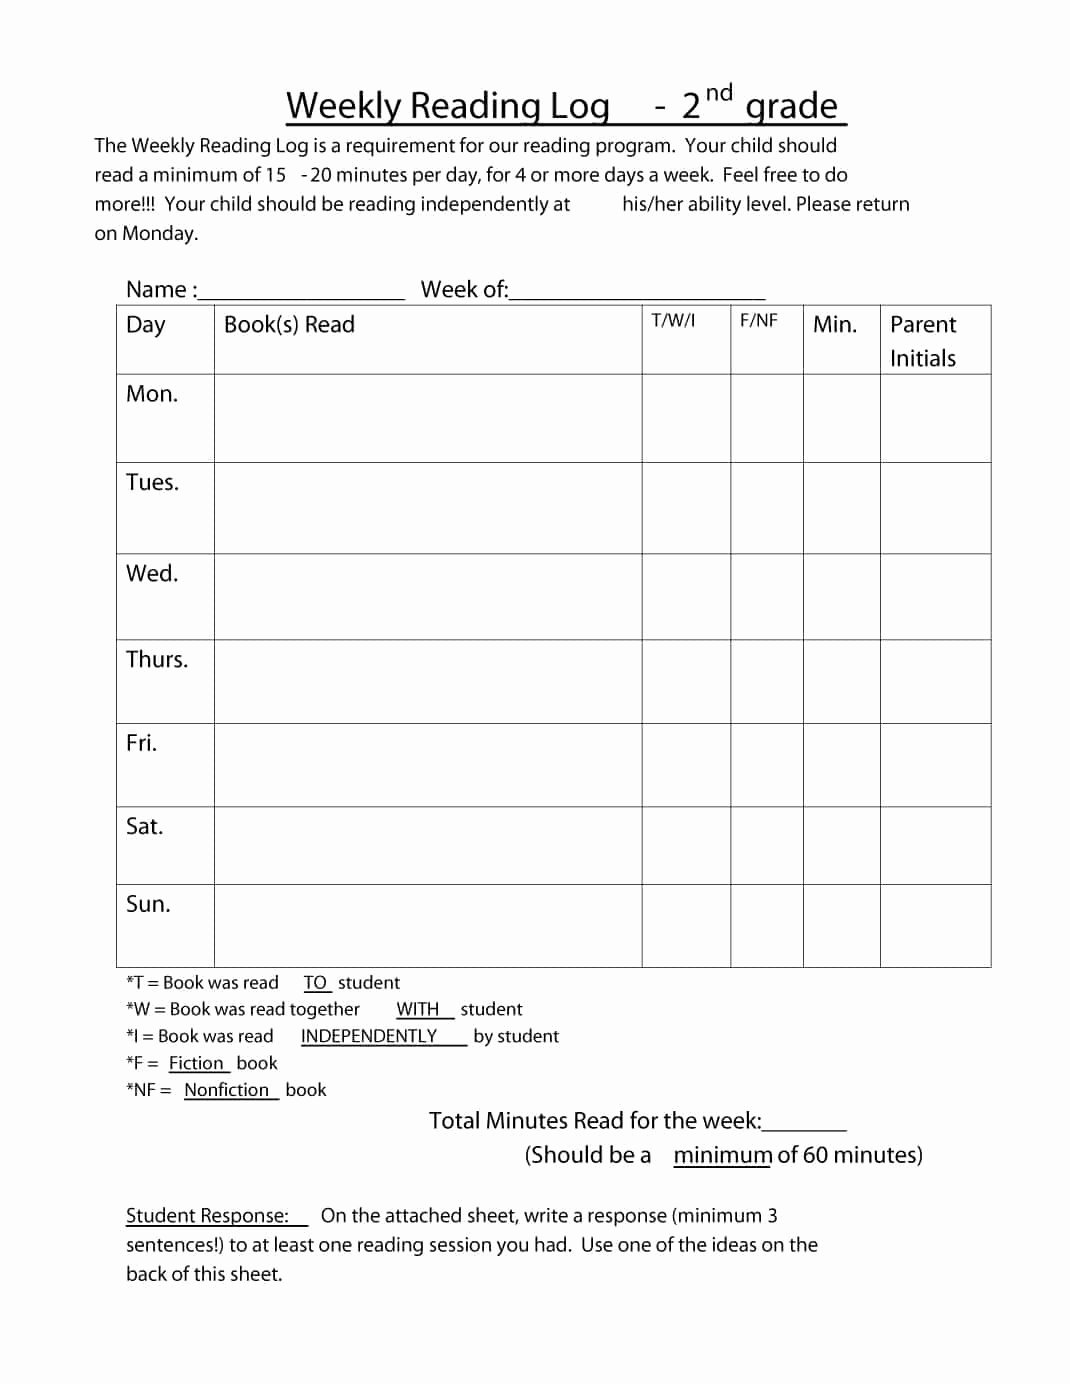 Reading Log Template Middle School Lovely 47 Printable Reading Log Templates for Kids Middle School